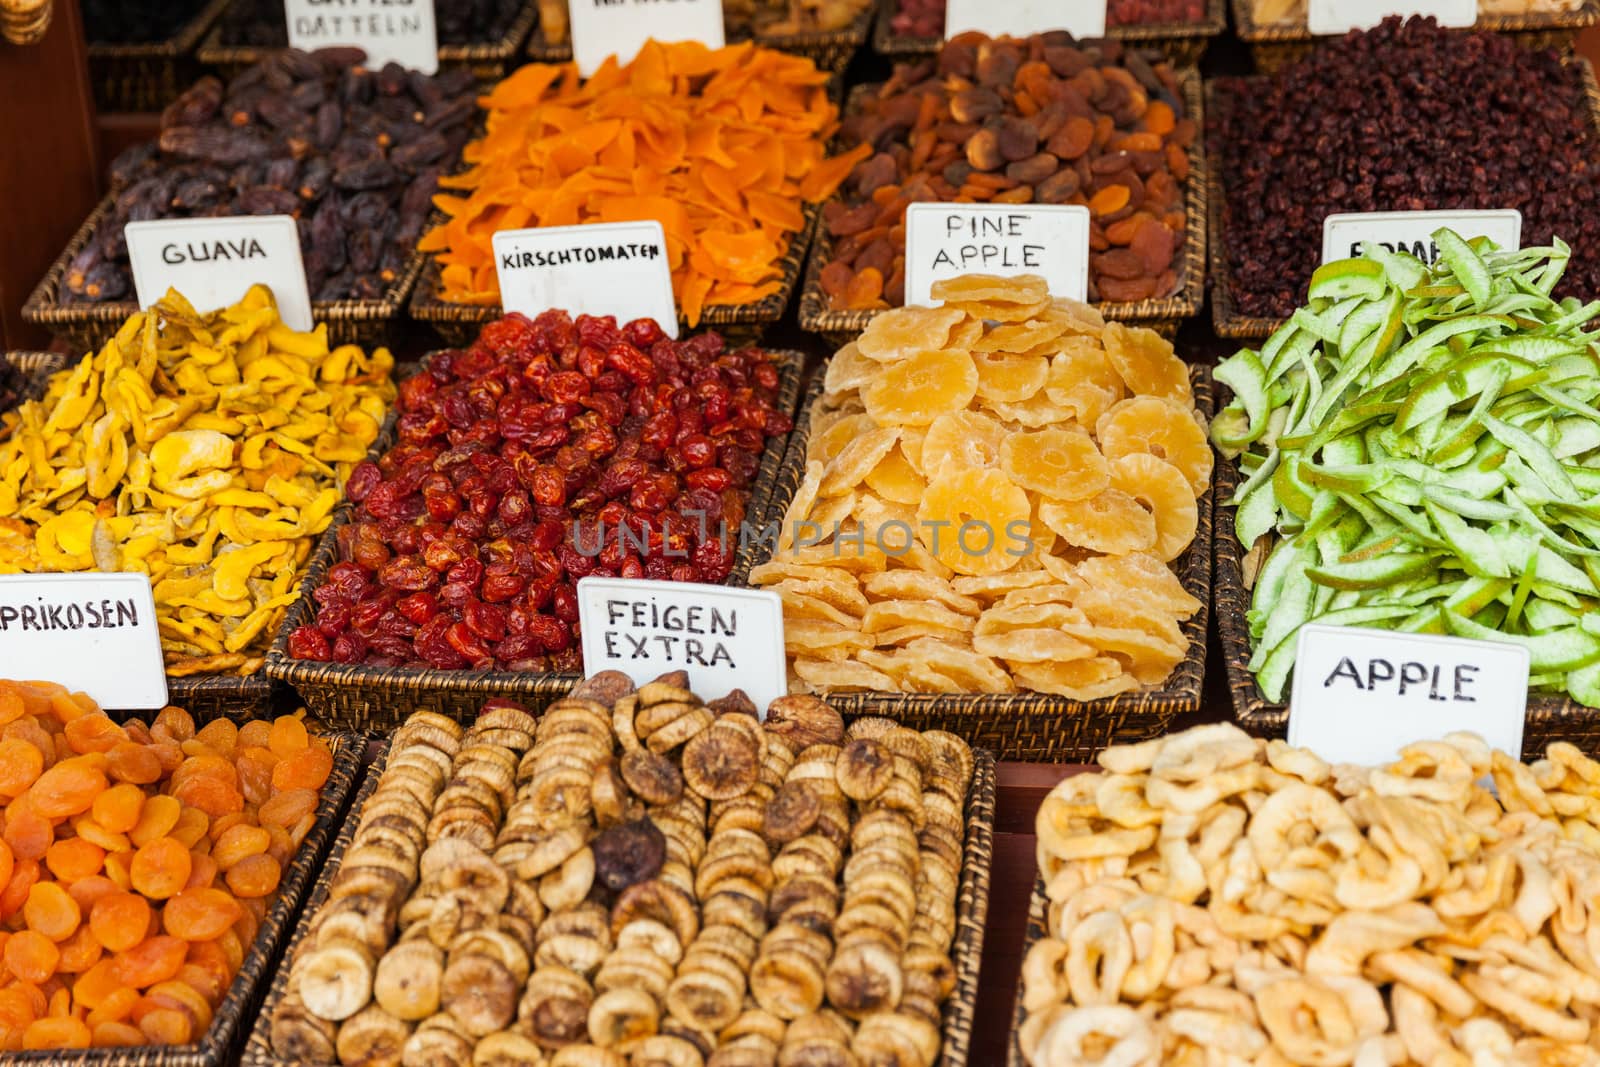 Healthy eating dried fruit snack at food market by ia_64